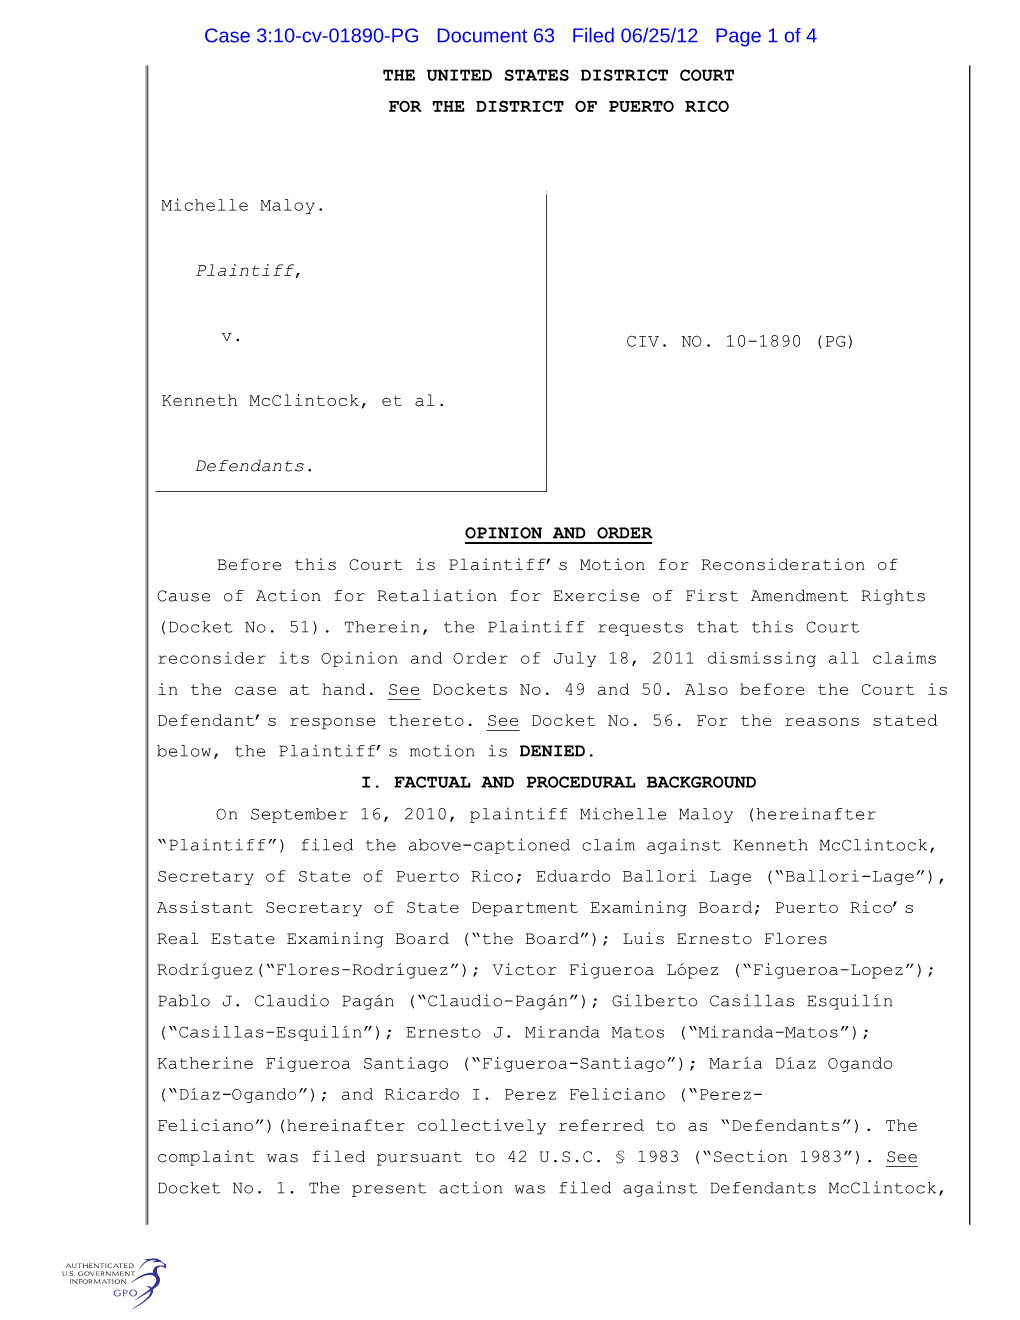 Case 3:10-Cv-01890-PG Document 63 Filed 06/25/12 Page 1 of 4